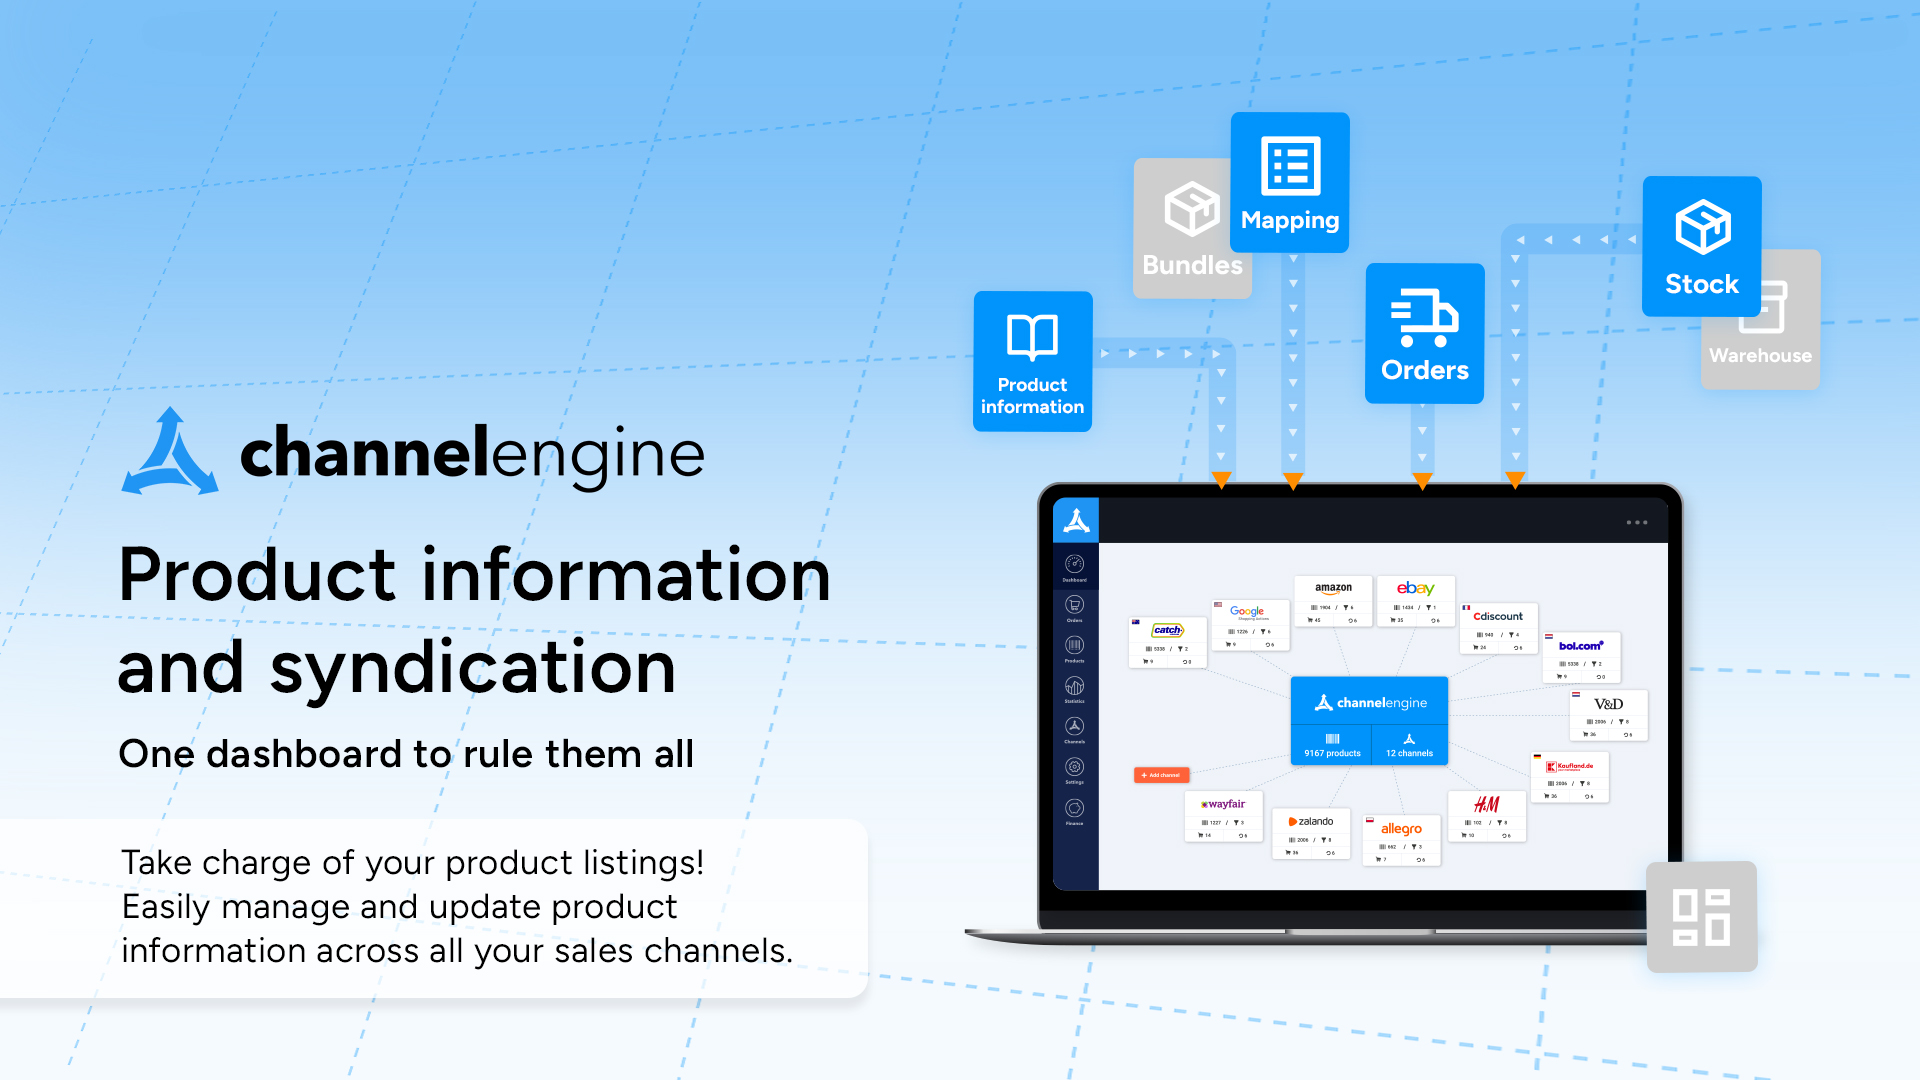 Take charge of your product listings. Easily manage and update product information across all your sales channels.